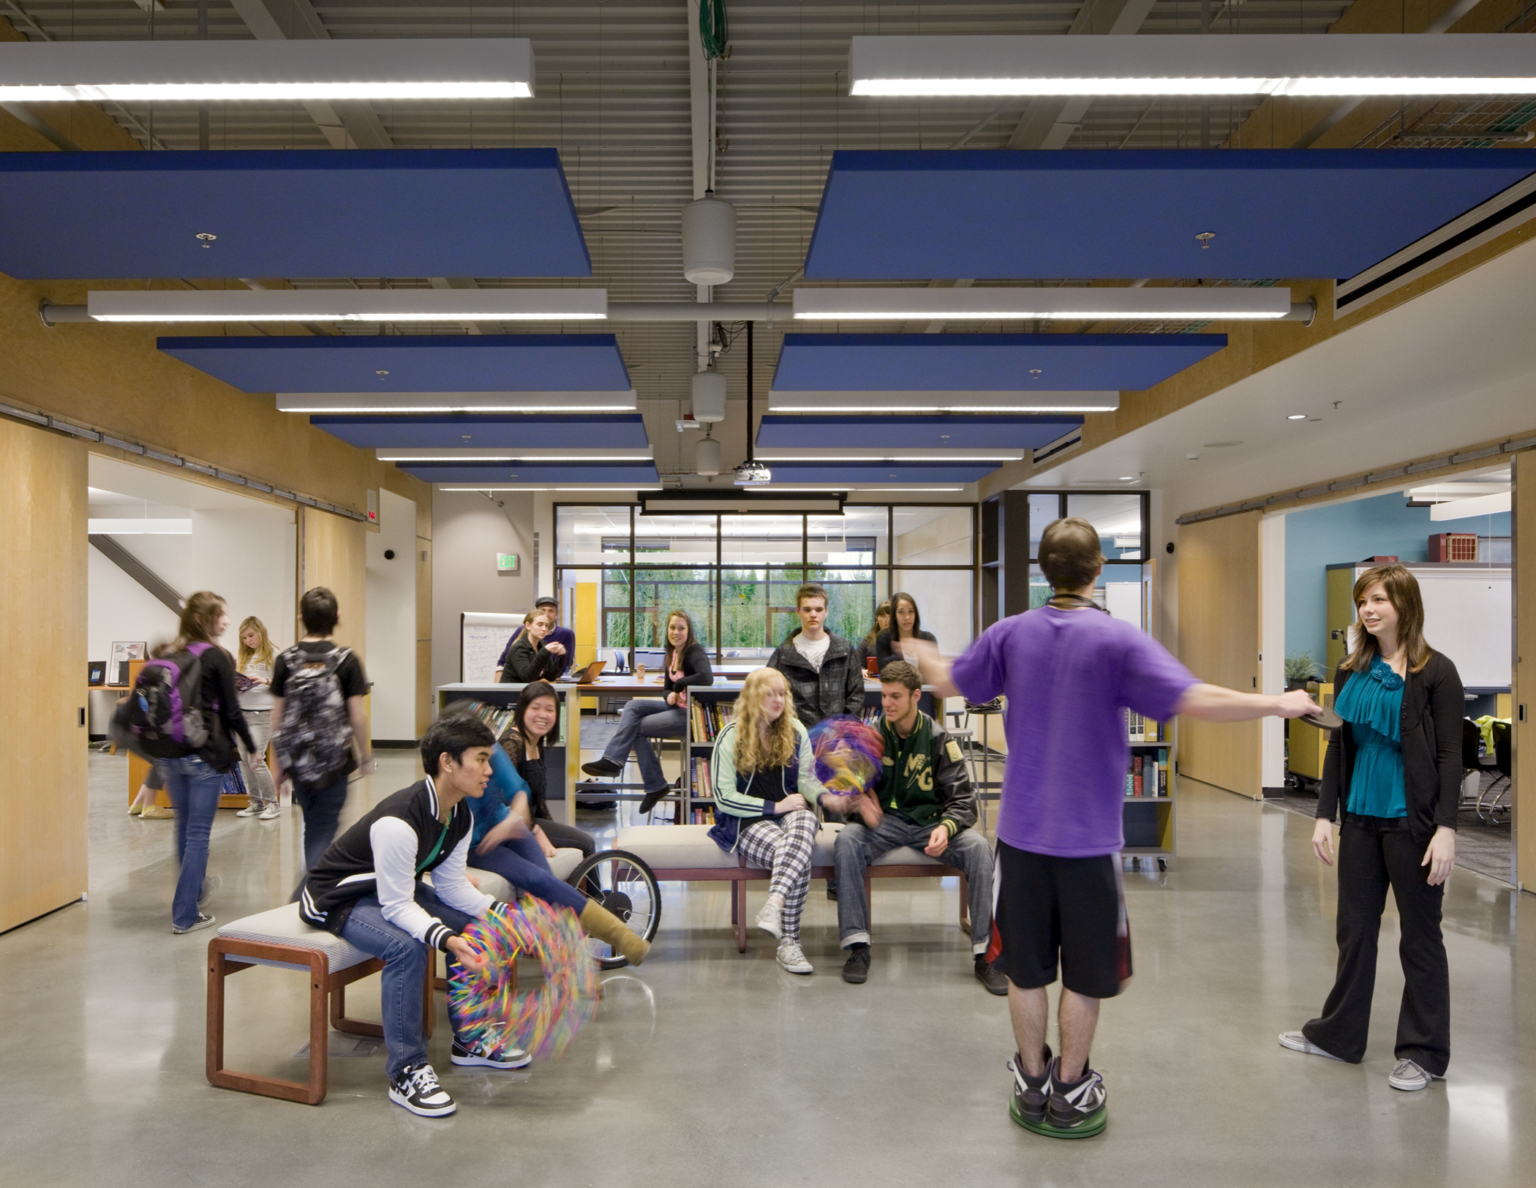 Seating area filled with students, a blue accent ceiling, and windows at Marysville Getchell High School.